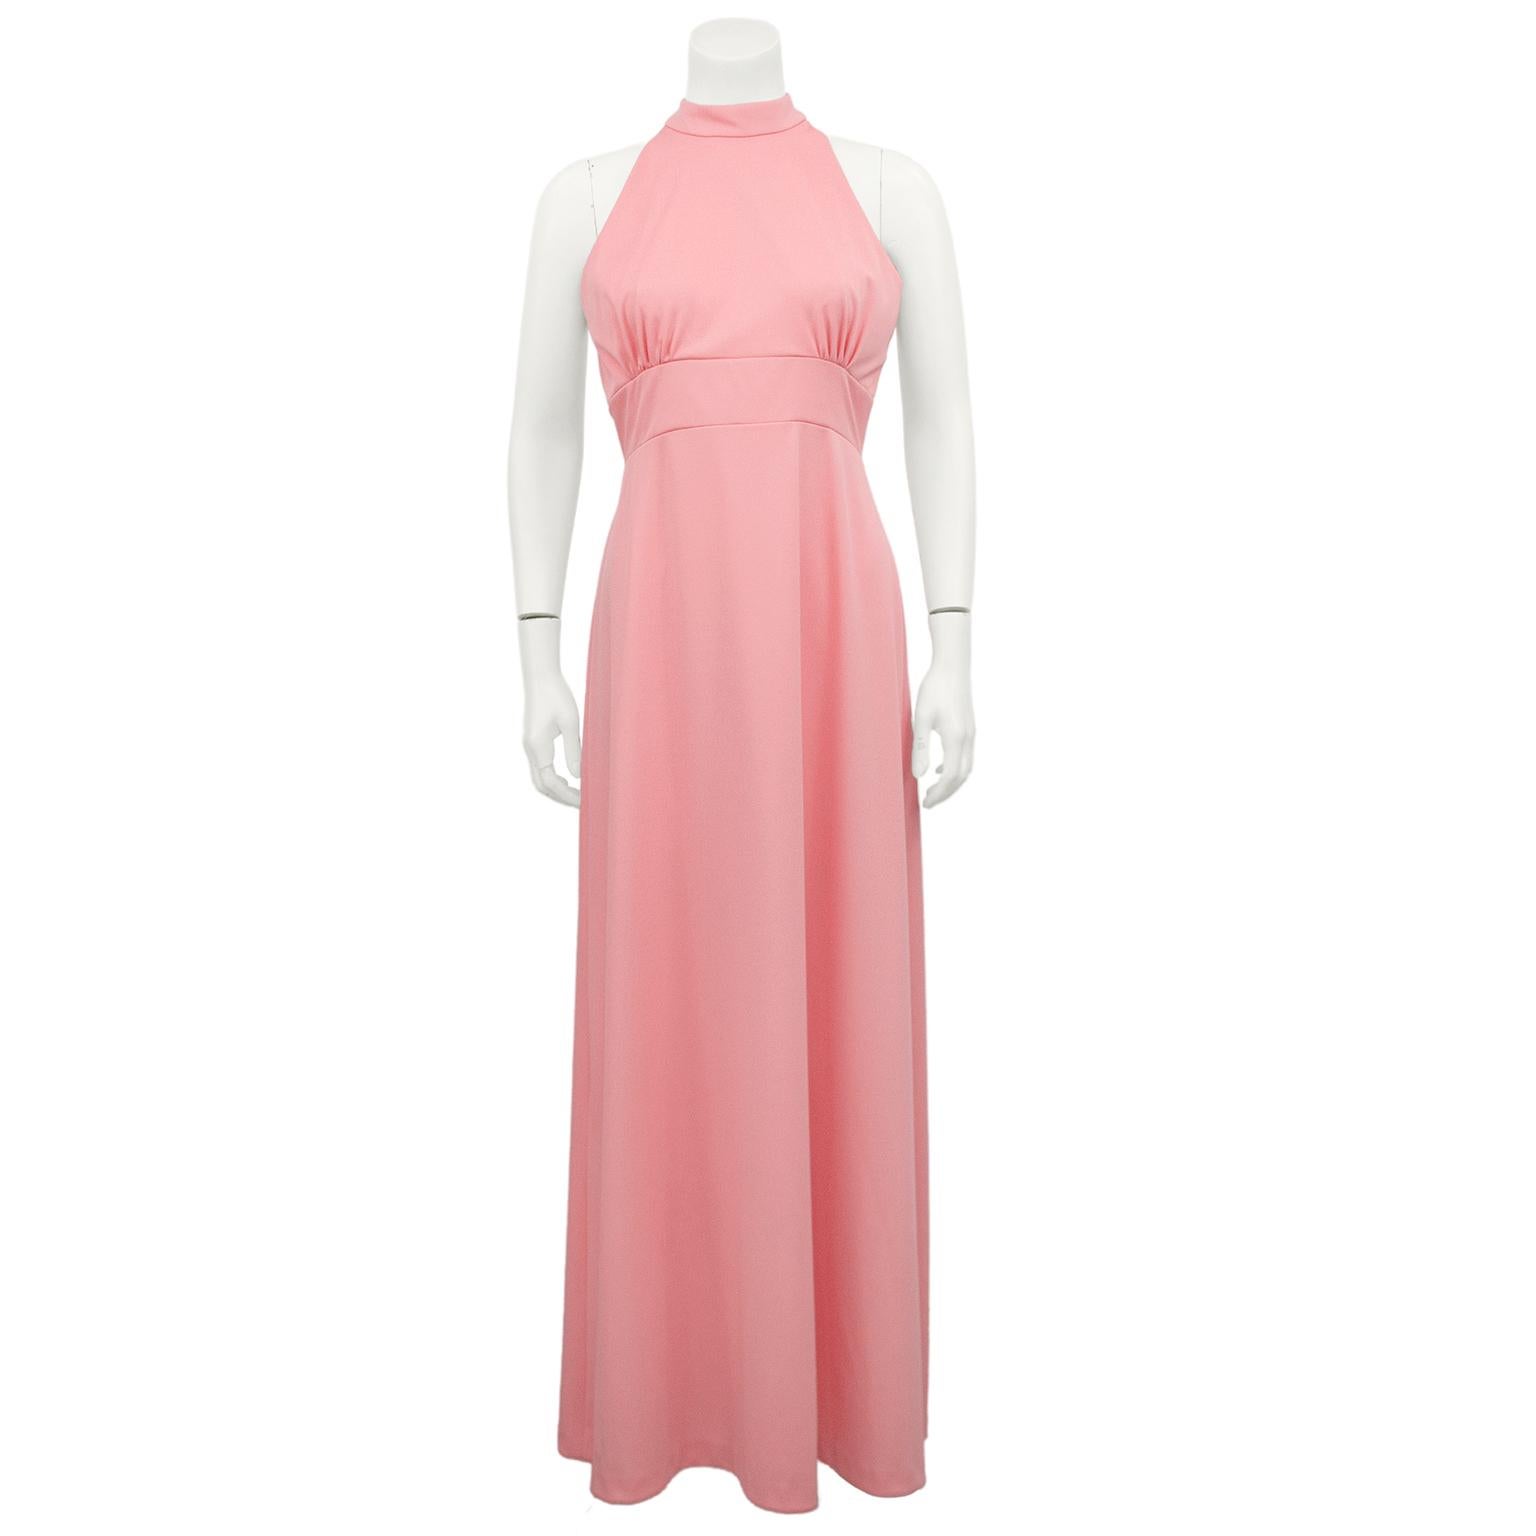 Darling coral pink  halter  top day gown and jacket ensemble from the 1960s. Poly  gown is sleeveless with high neck and ruching at bust. Empire waist with full length flowing skirt. Lace jacket is cropped with a smocked waist and bishop sleeves.